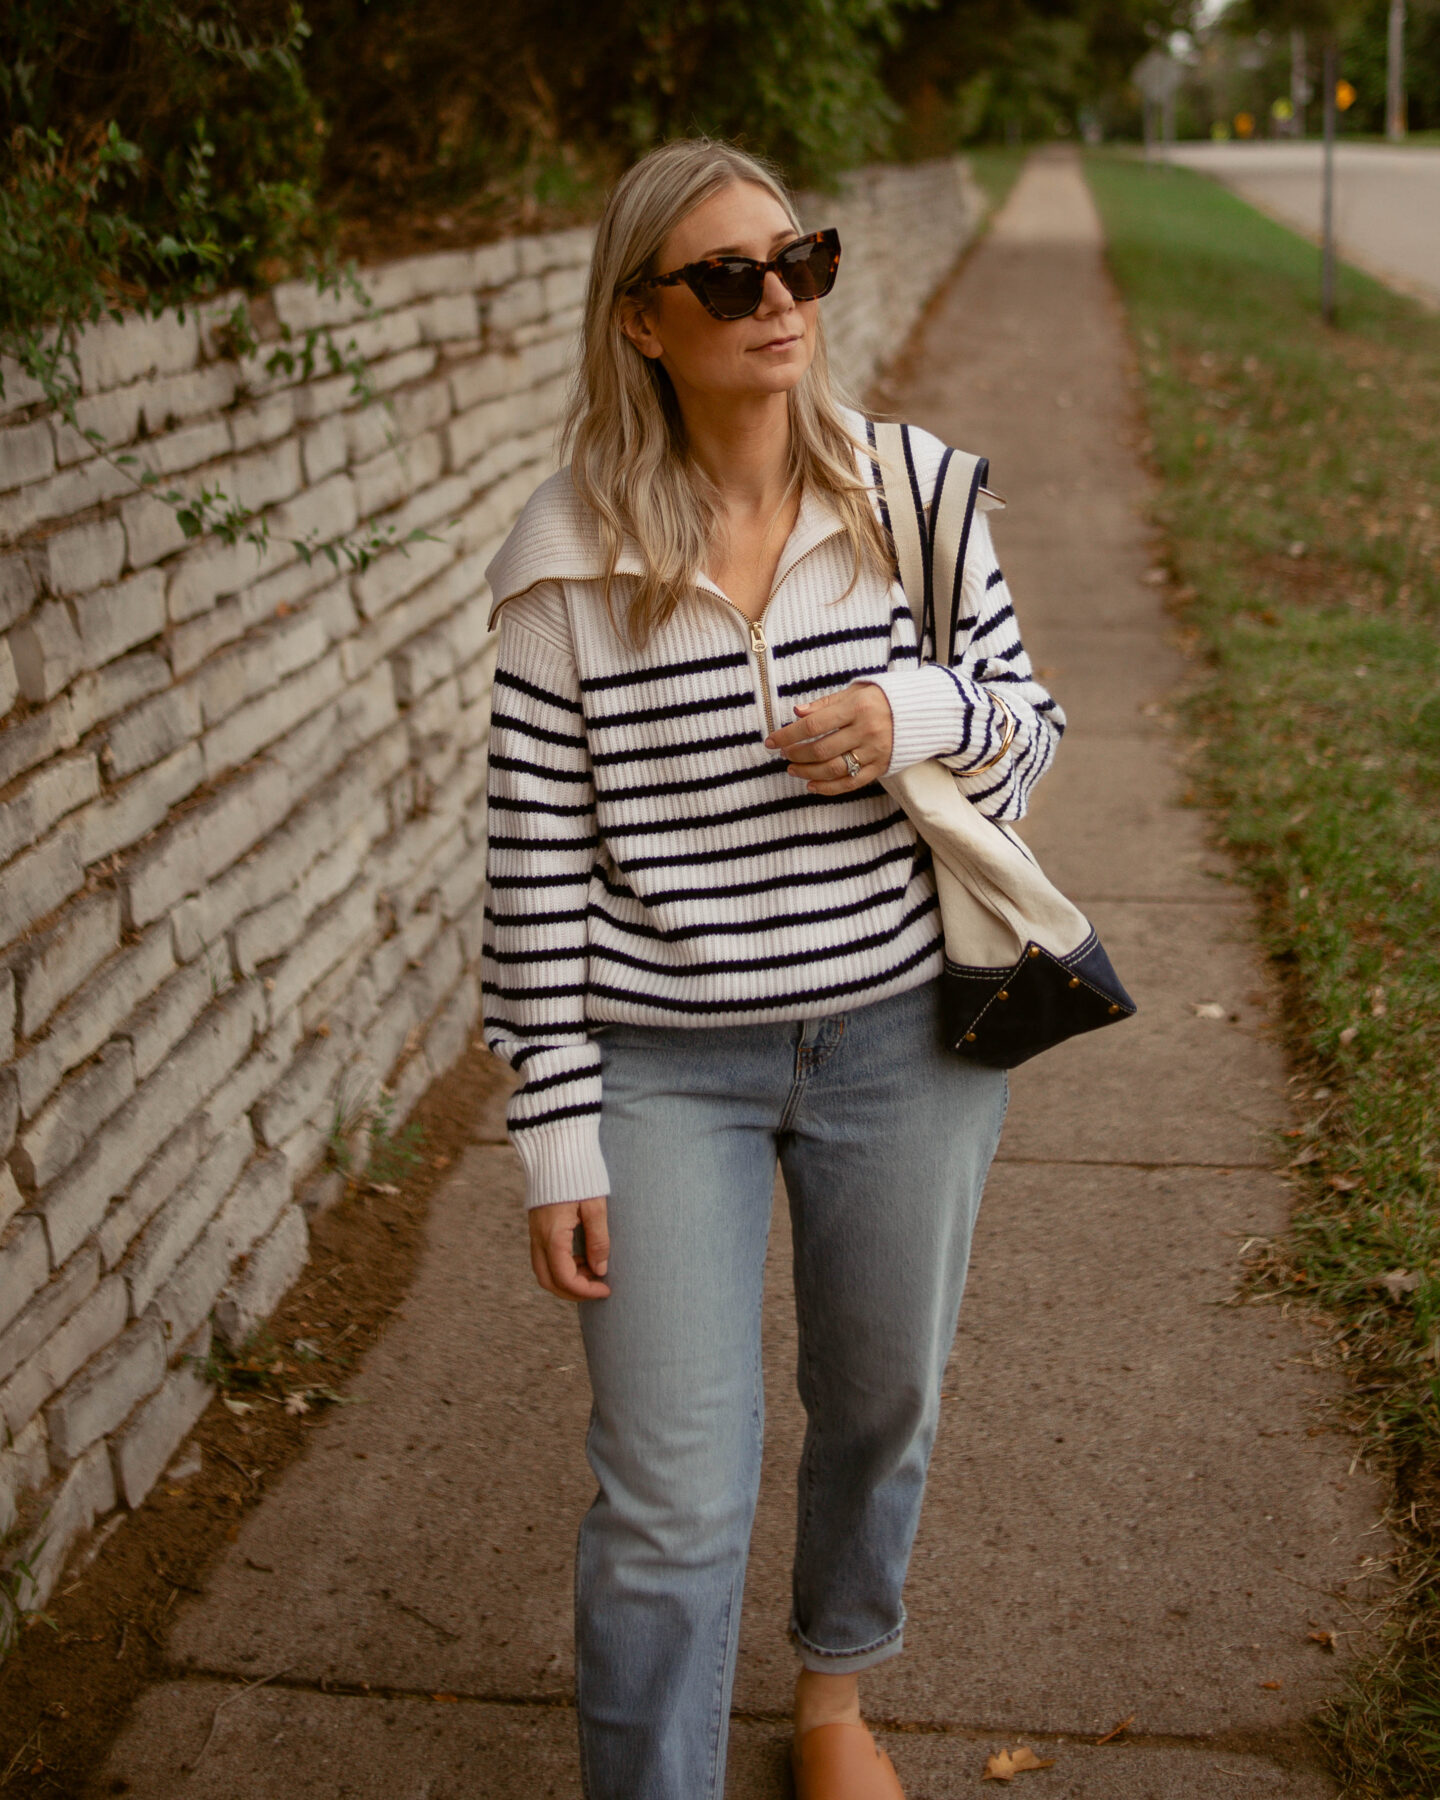 Karin Emily Wears a cashmere breton stripe sweater, light wash relaxed jeans, and sherpa mules - all from J. Crew